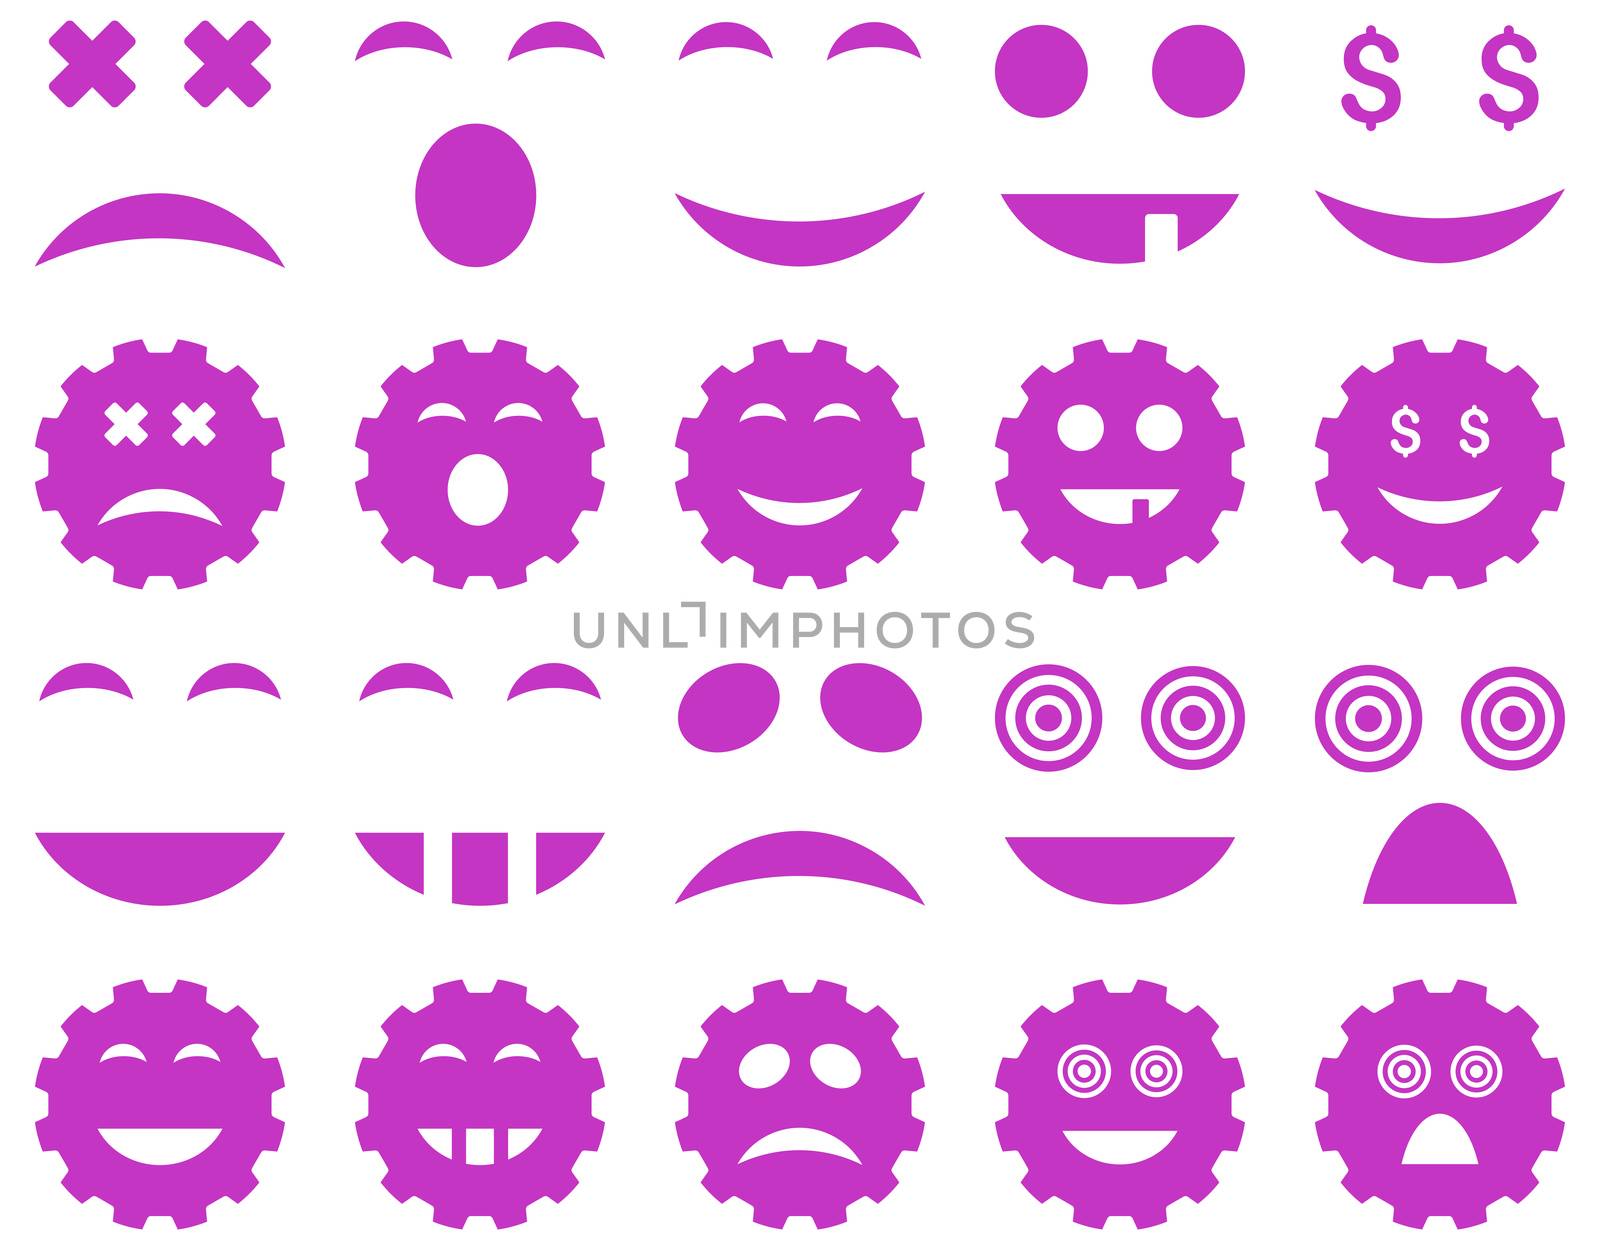 Tool, gear, smile, emotion icons. Glyph set style is flat images, violet symbols, isolated on a white background.